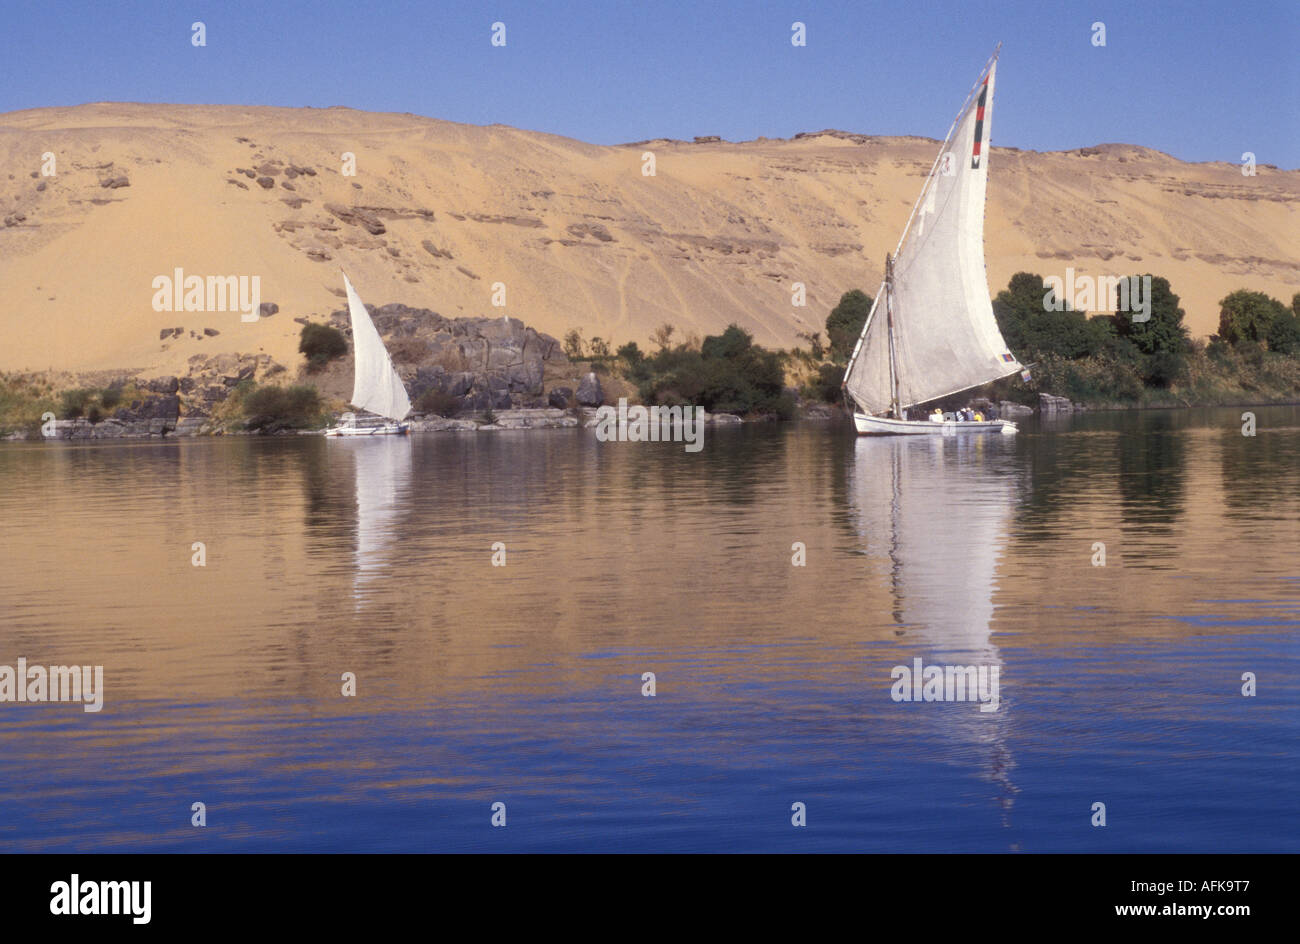 Two feluccas sailing towards each other on the River Nile near Aswan Egypt Stock Photo